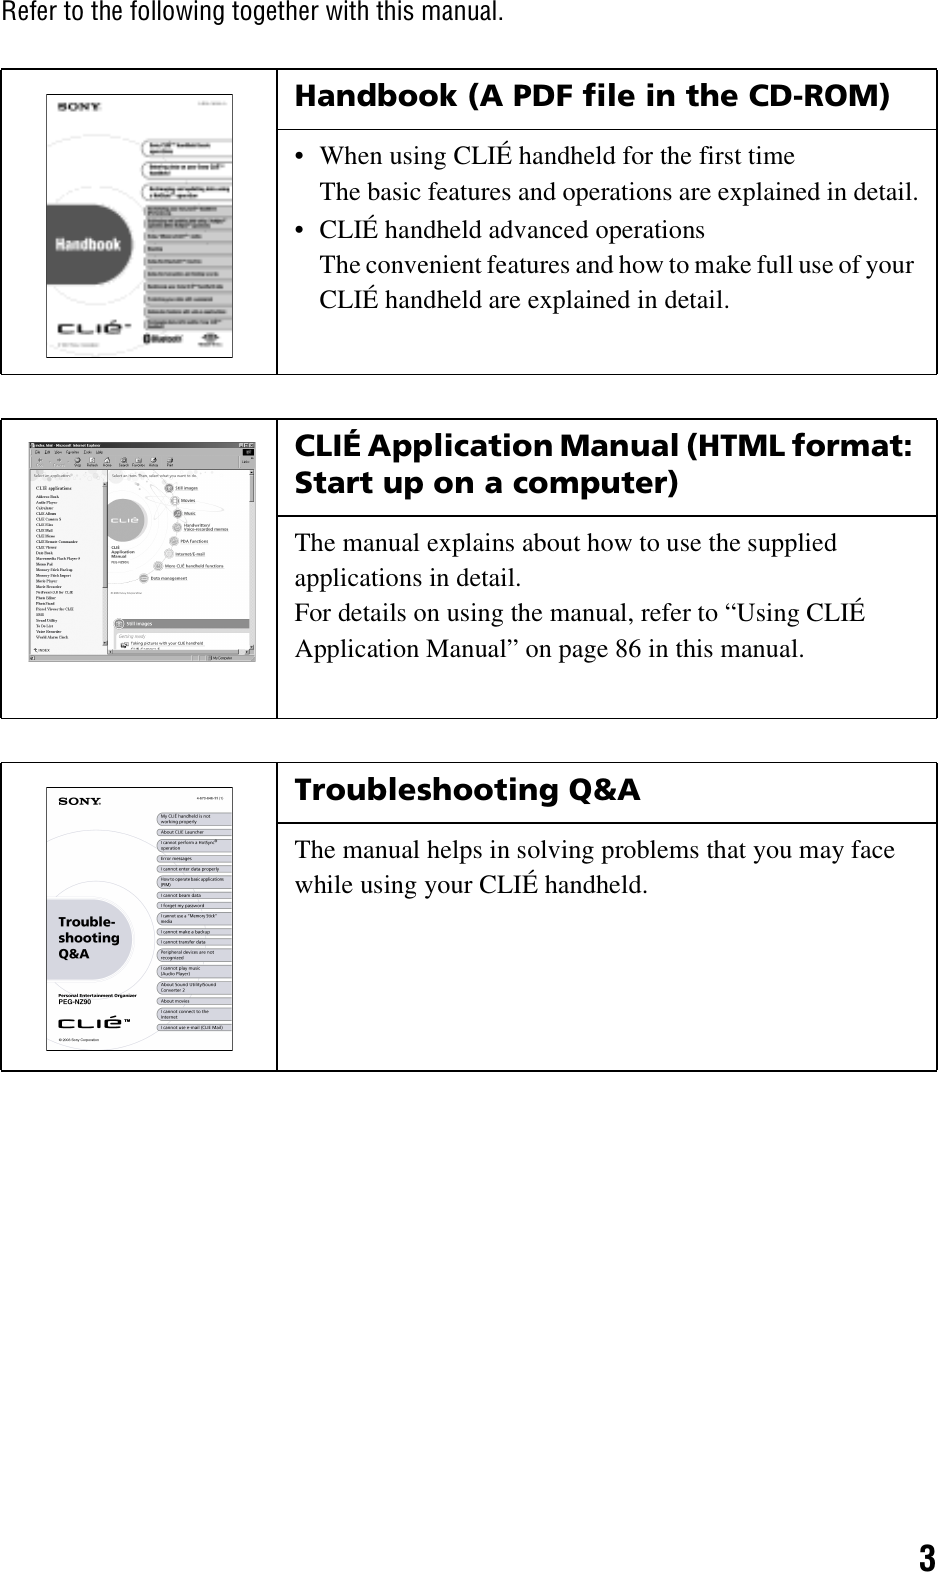 3Refer to the following together with this manual.Handbook (A PDF file in the CD-ROM)• When using CLIÉ handheld for the first timeThe basic features and operations are explained in detail.• CLIÉ handheld advanced operationsThe convenient features and how to make full use of your CLIÉ handheld are explained in detail.CLIÉ Application Manual (HTML format: Start up on a computer)The manual explains about how to use the supplied applications in detail.For details on using the manual, refer to “Using CLIÉ Application Manual” on page 86 in this manual.Troubleshooting Q&amp;AThe manual helps in solving problems that you may face while using your CLIÉ handheld.